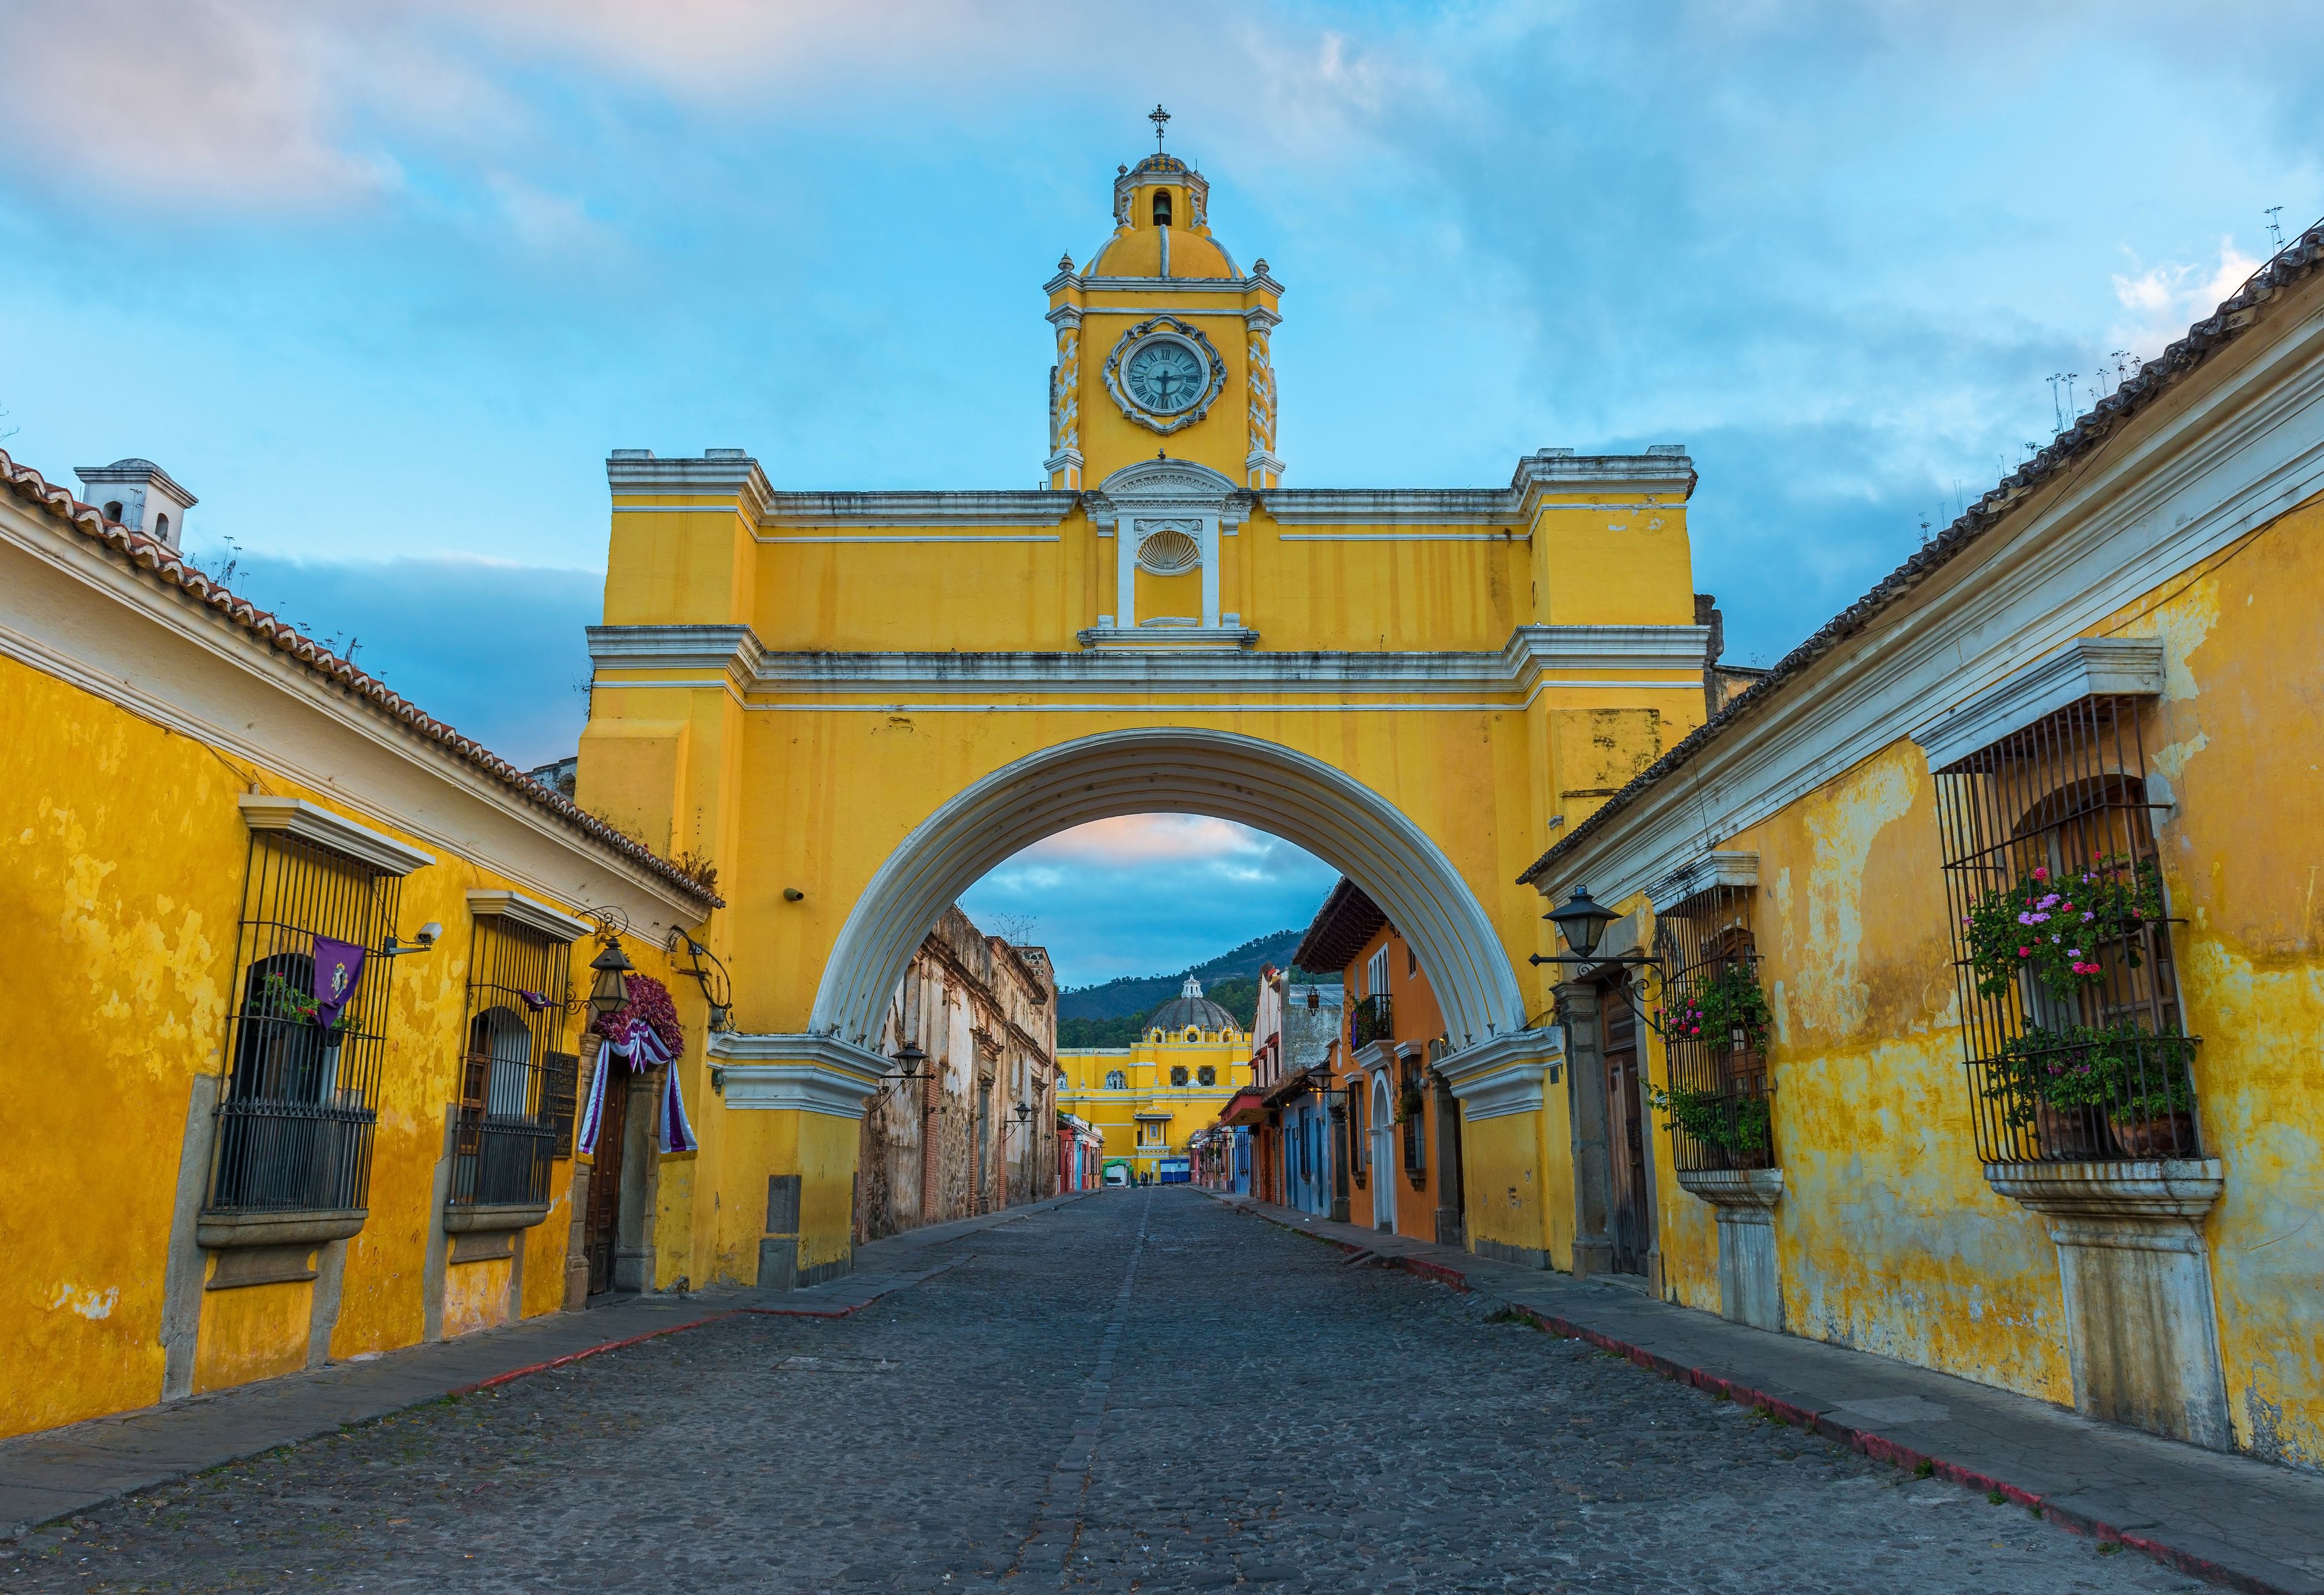 10 TOP Things to Do in Antigua Guatemala (2020 Attraction & Activity